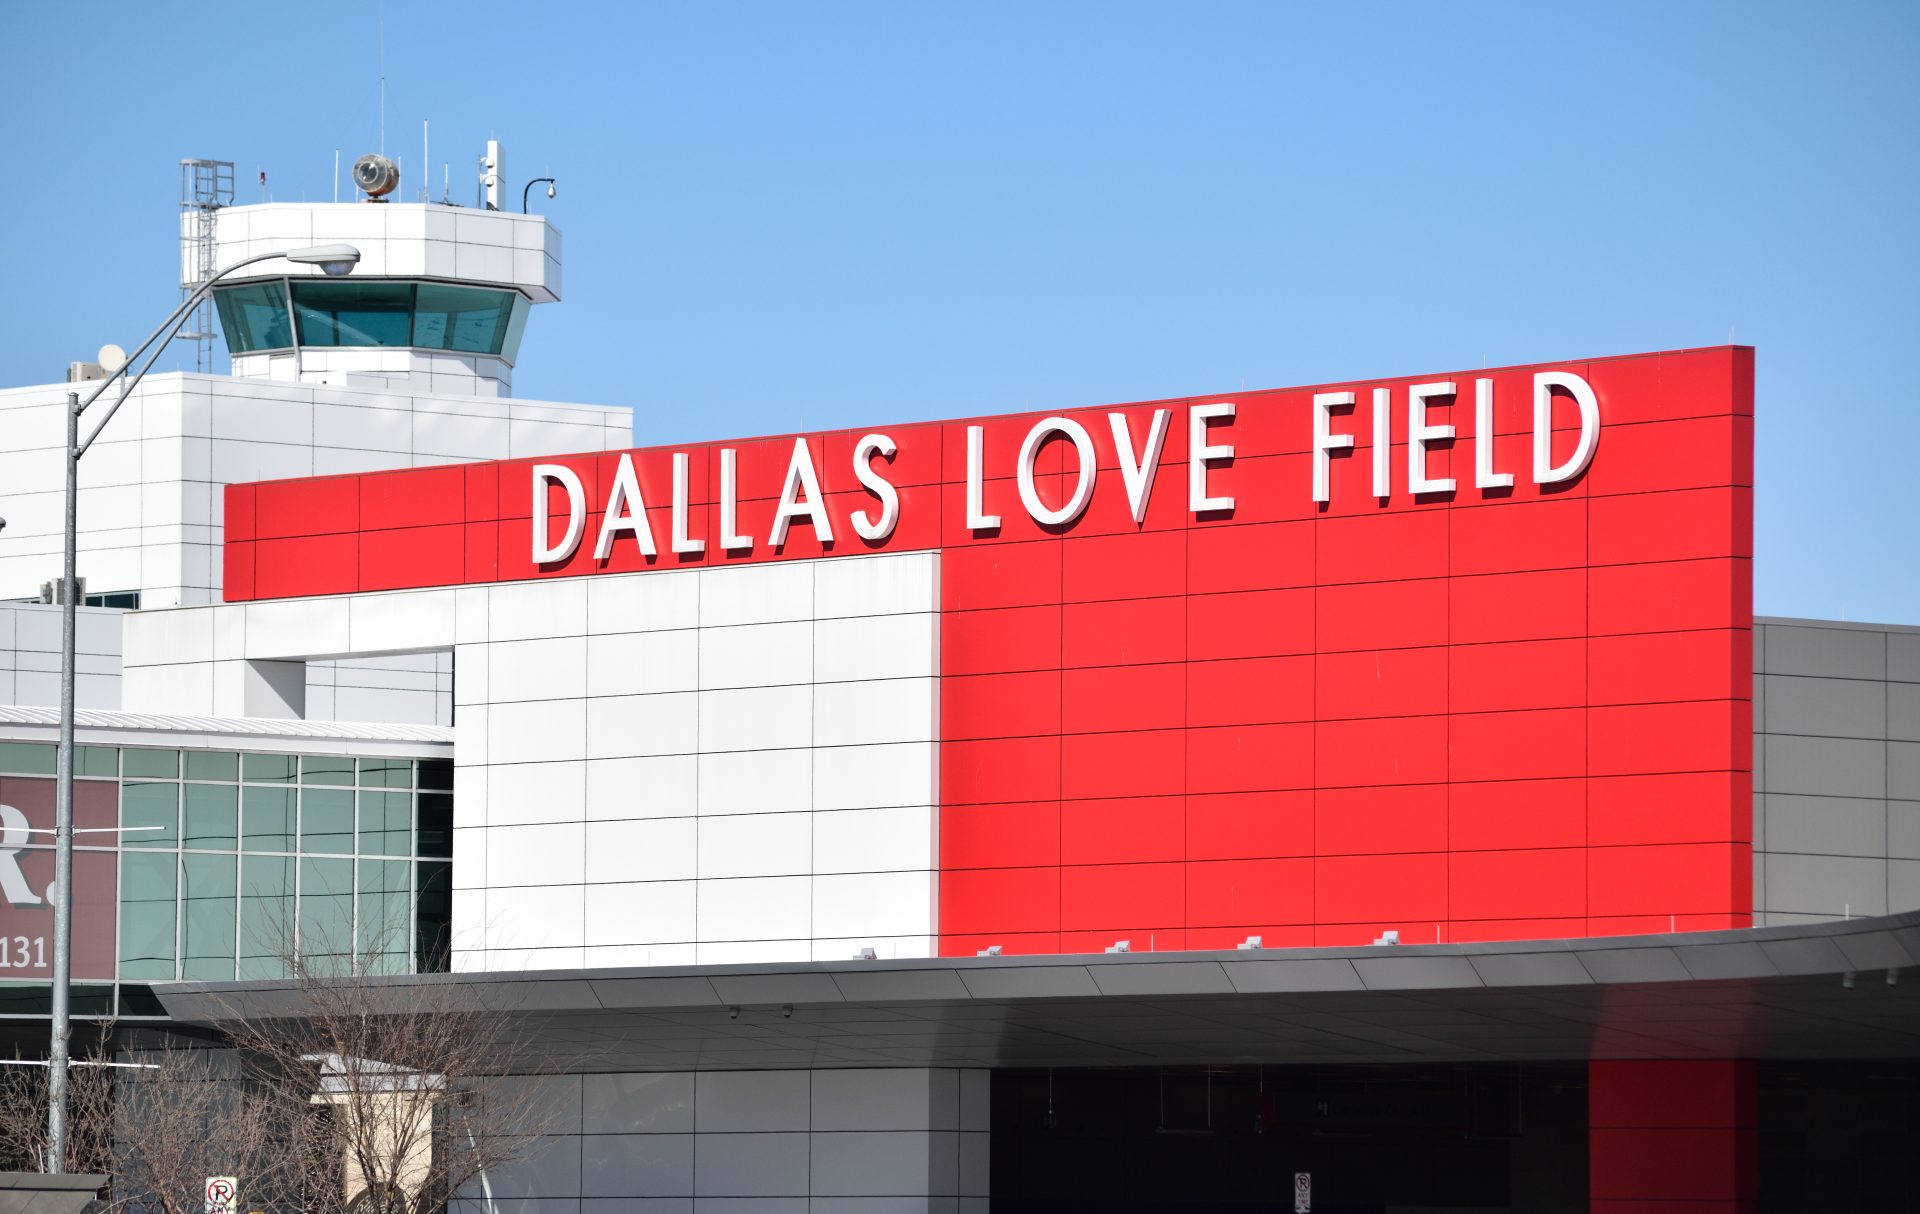 Woman Shot By Authorities After Opening Fire Inside Dallas Love Field